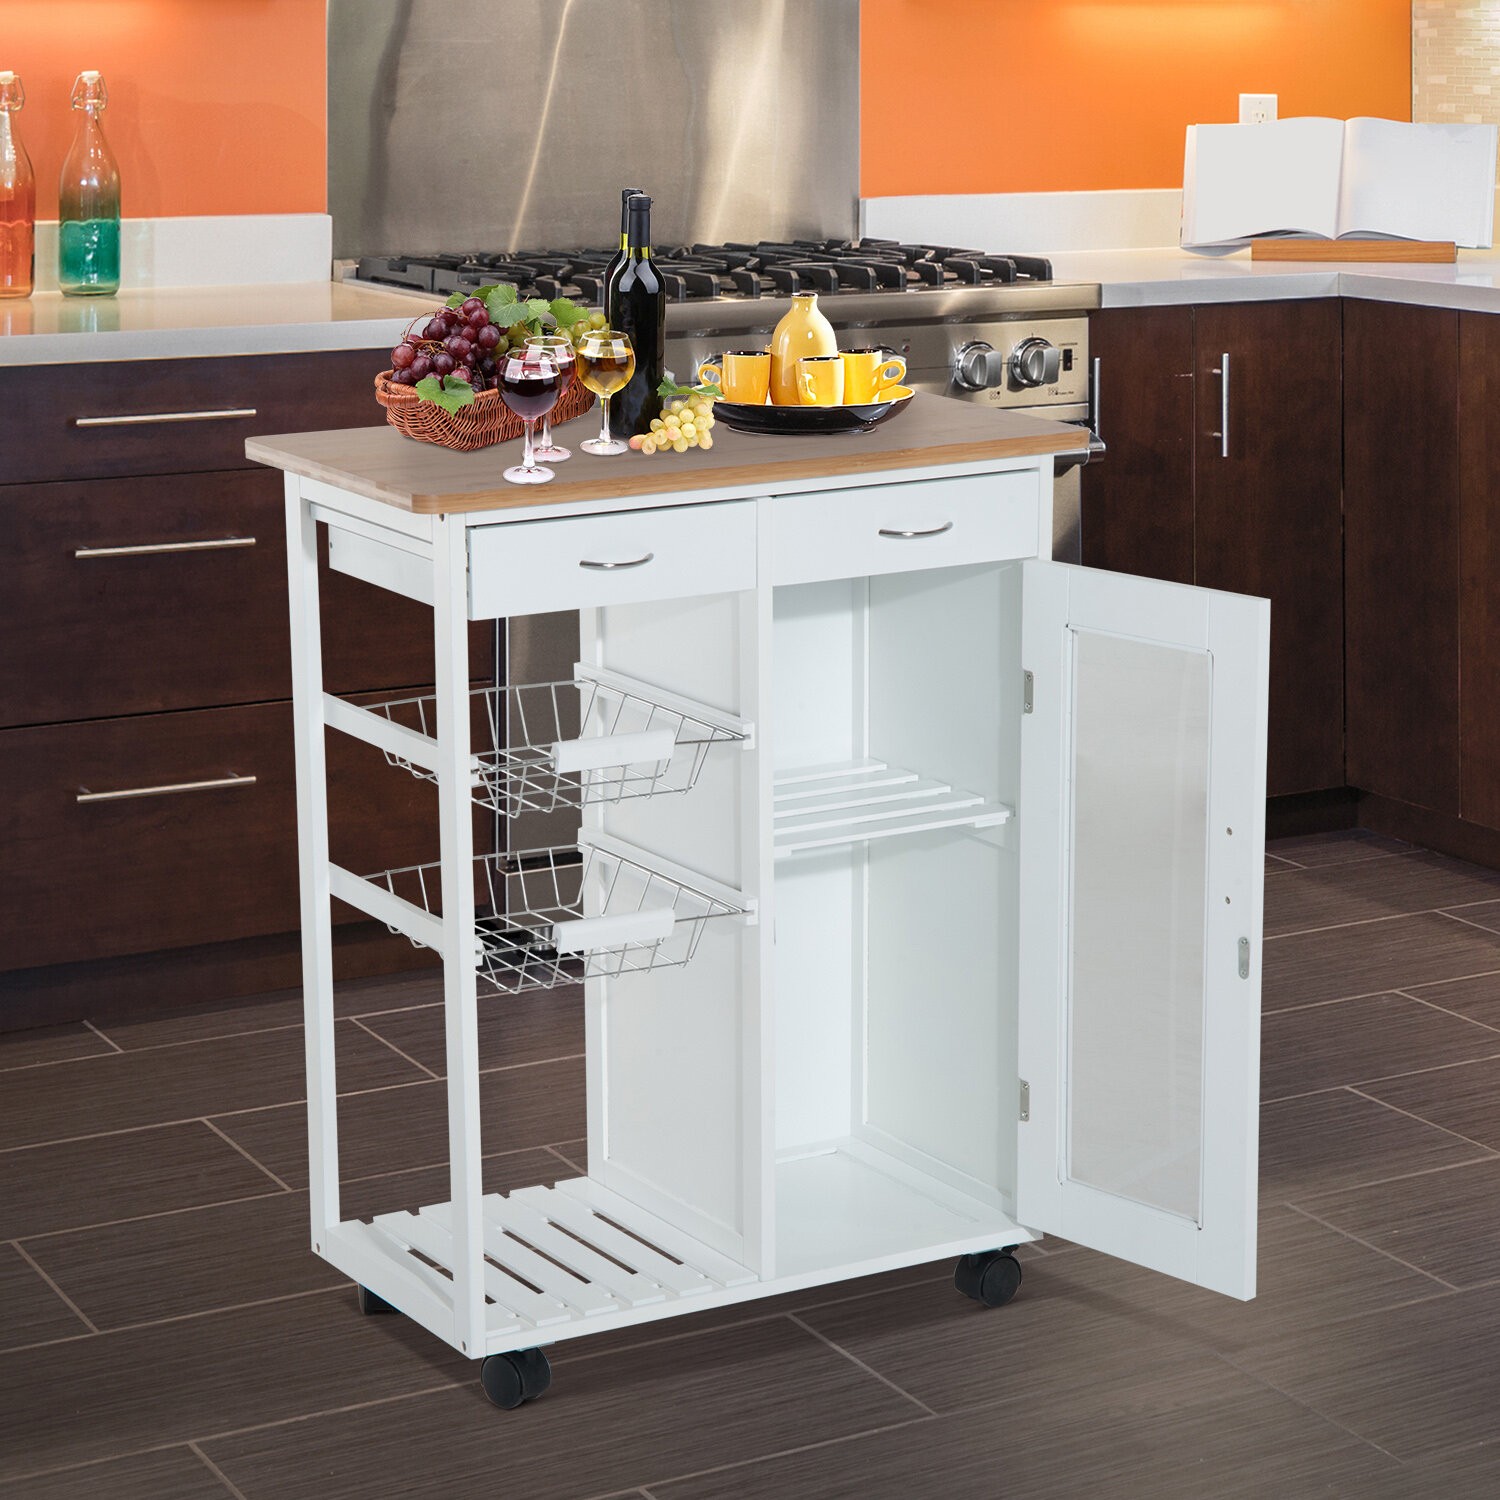 Portable Kitchen Islands With Breakfast Bar Ideas On Foter